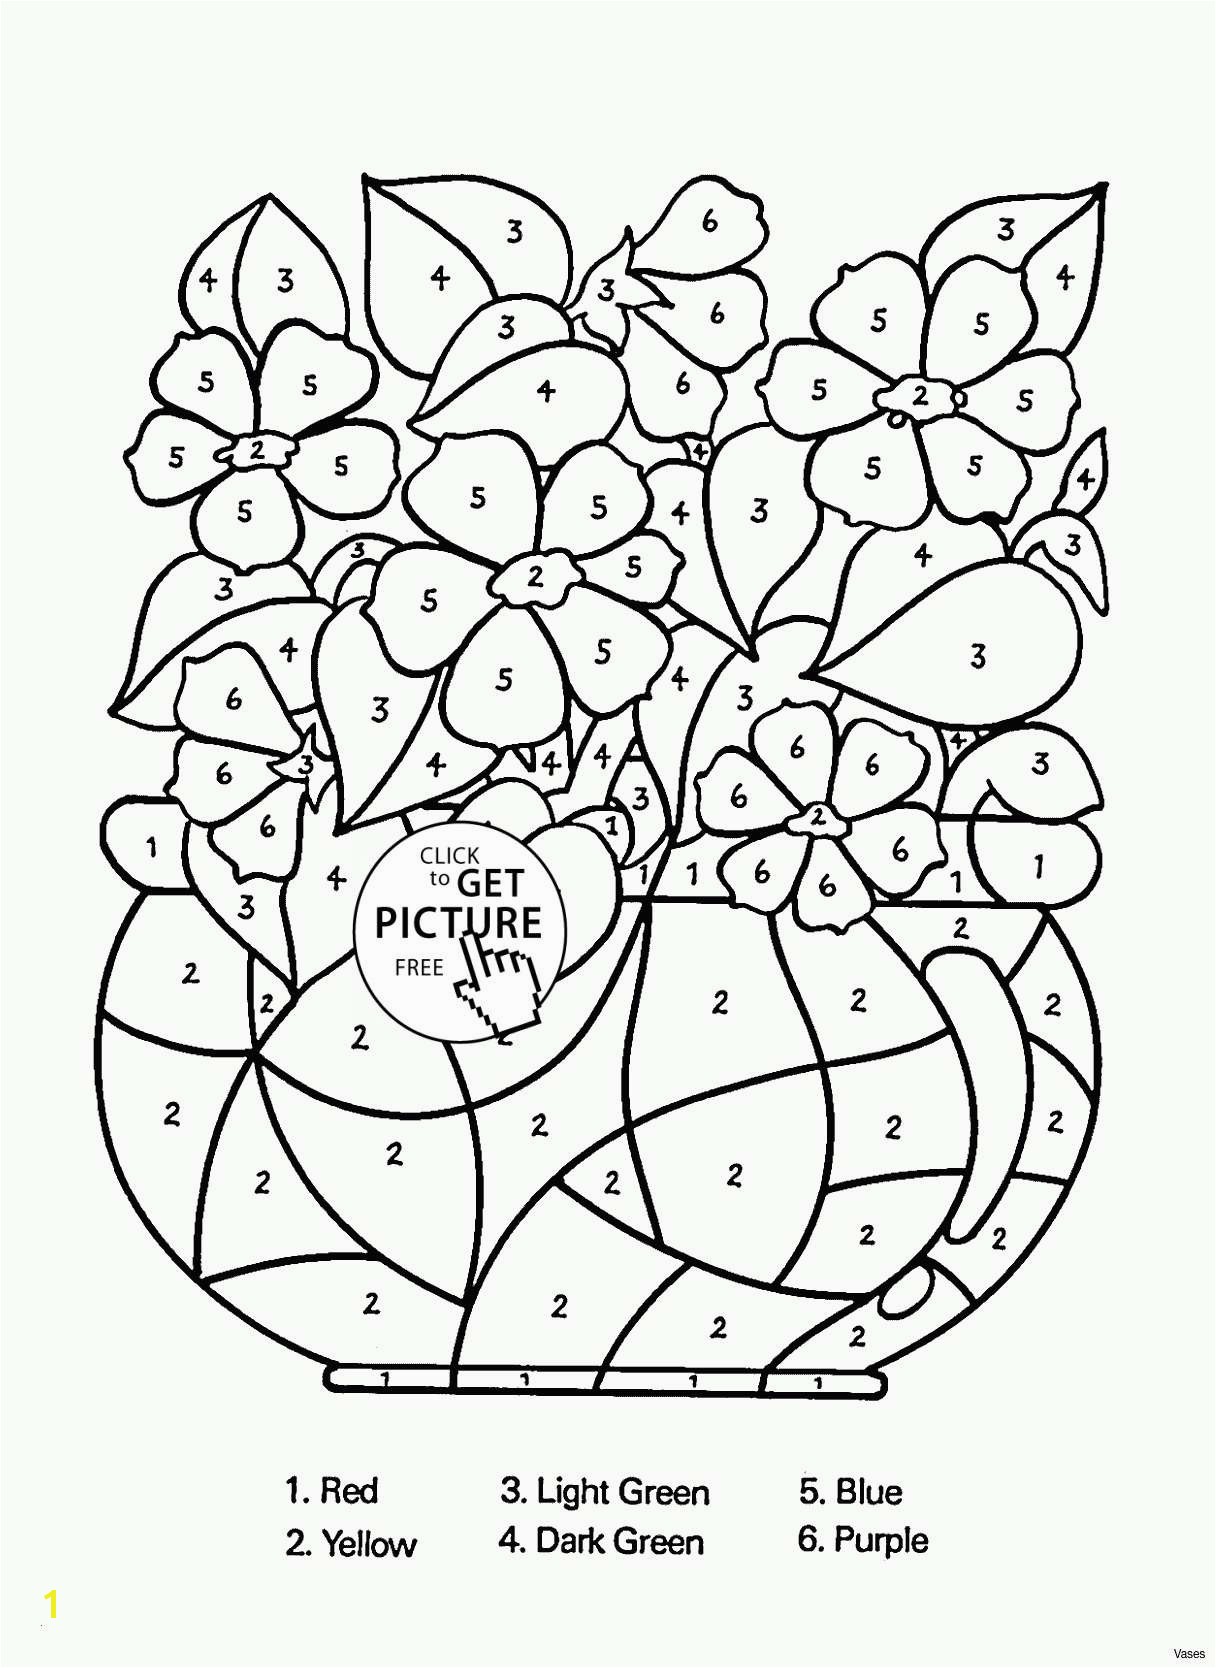 Detailed Snowflake Coloring Pages Best Free Coloring Pages Christmas Snowflakes Katesgrove